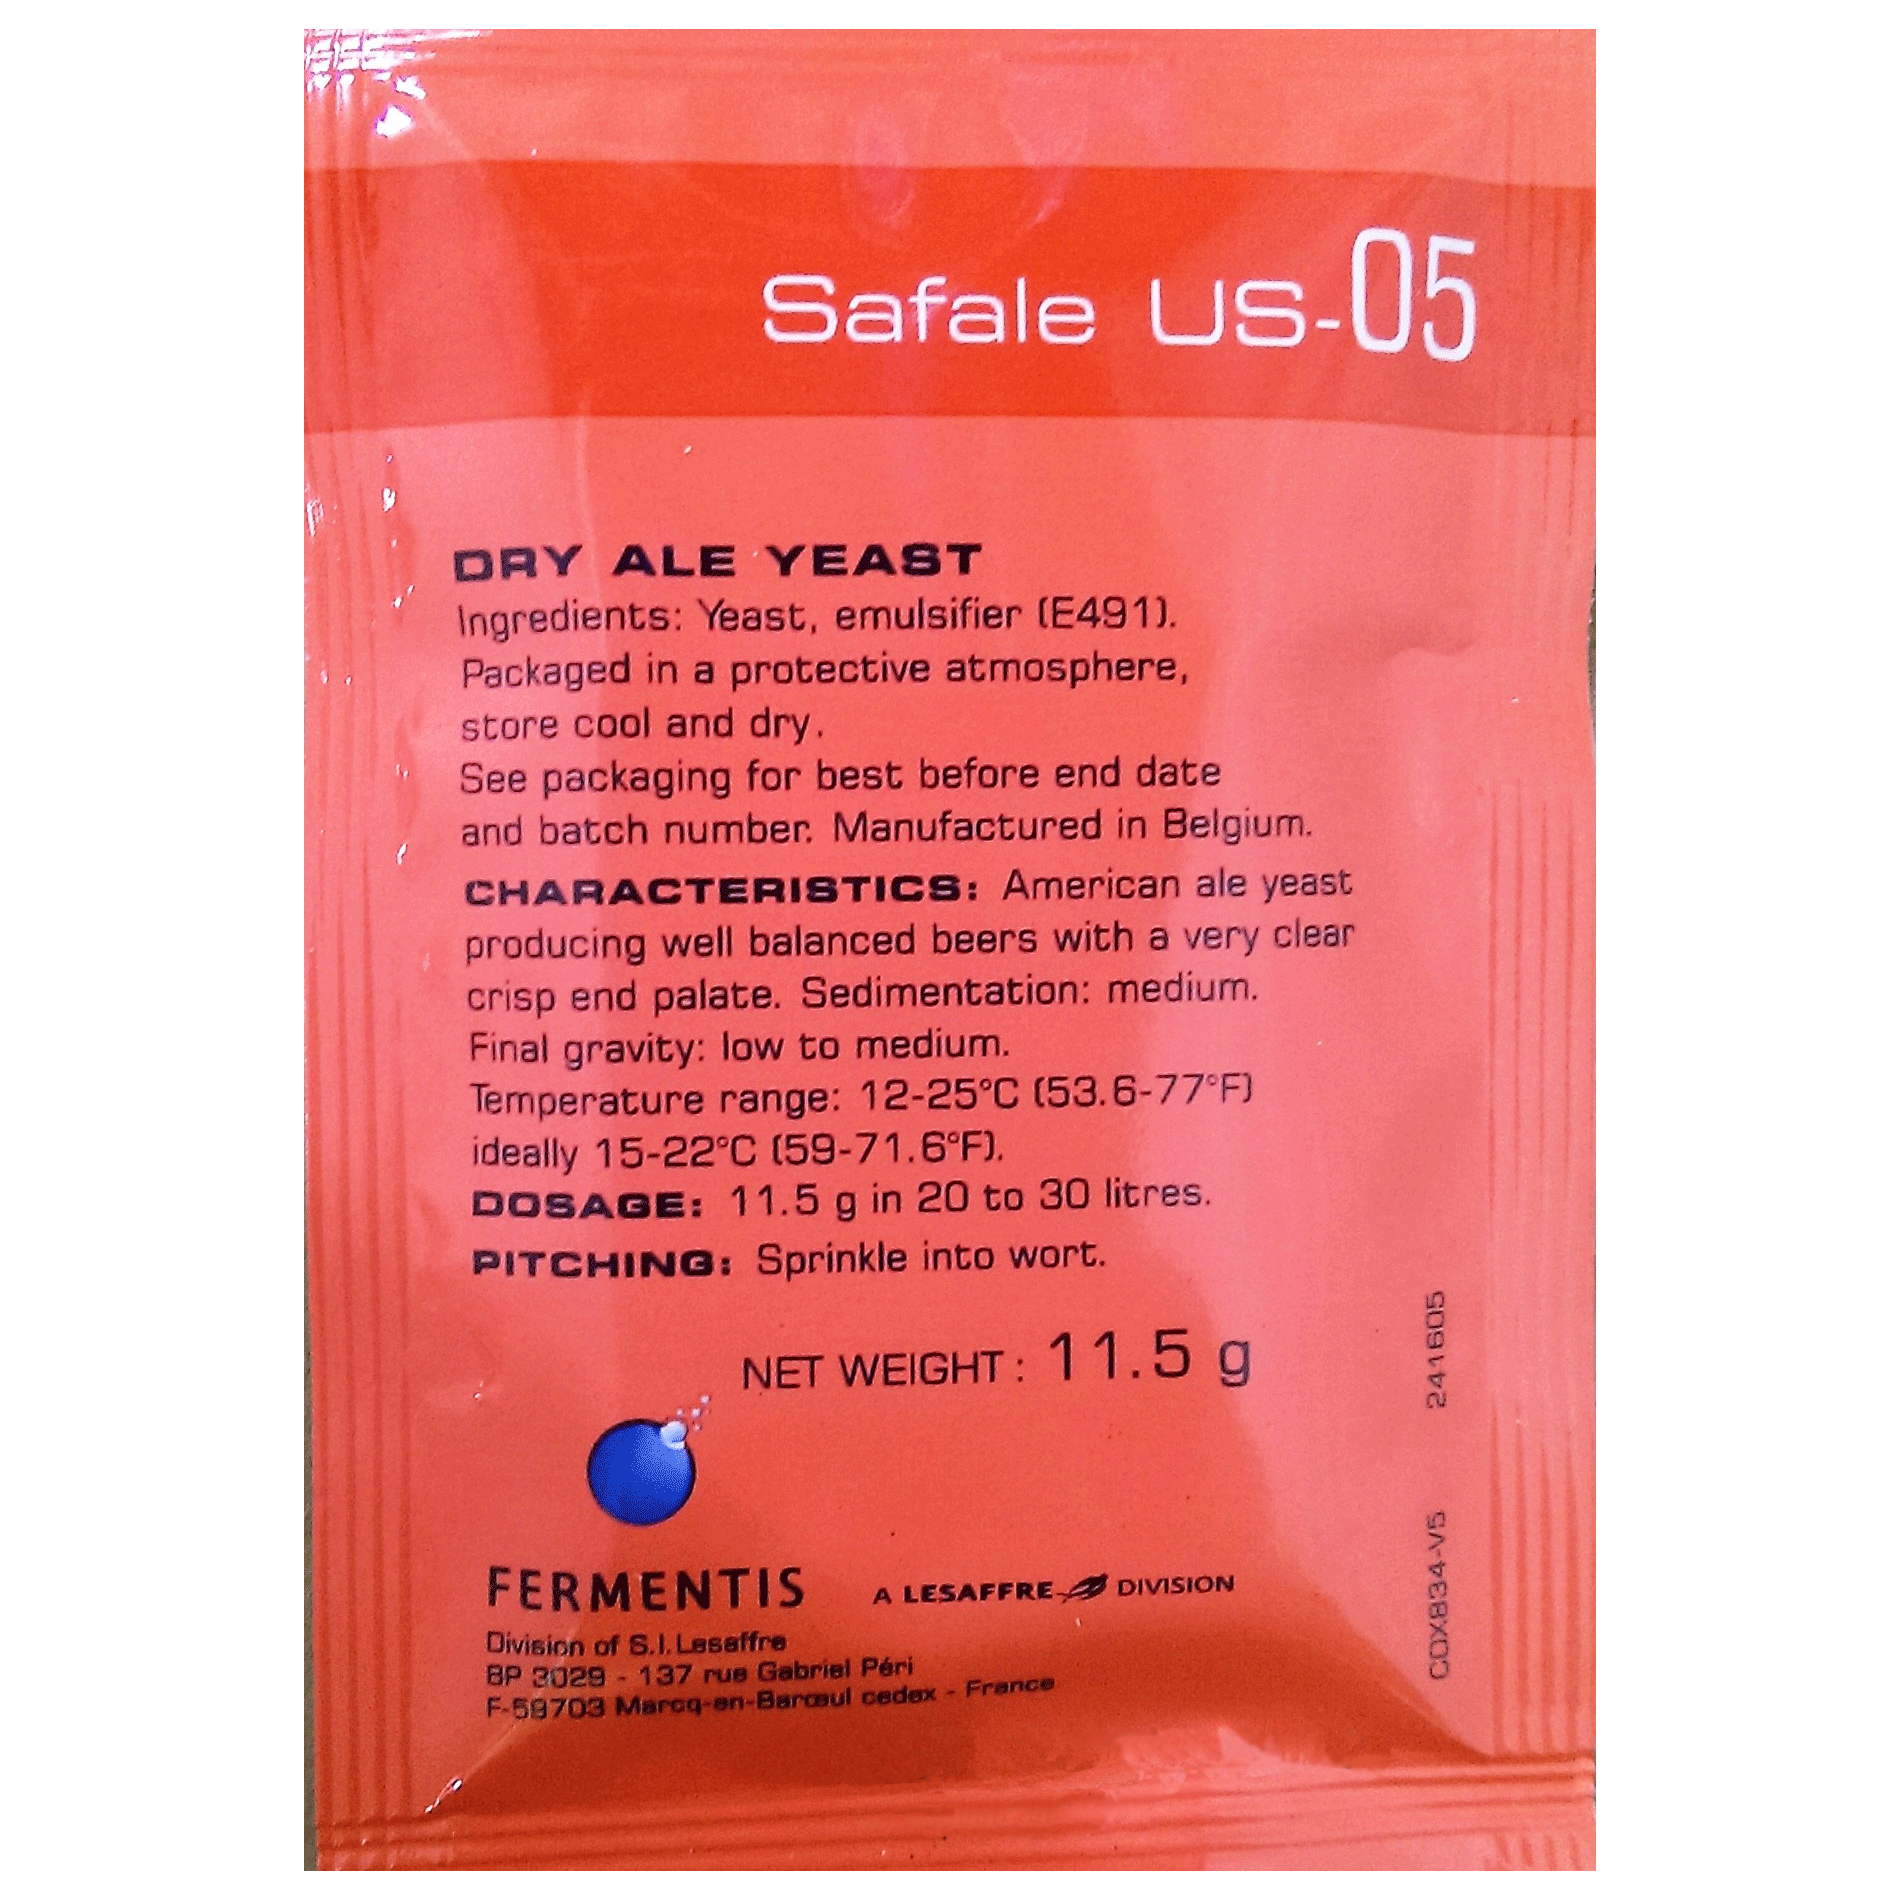 SafAle US-05 Yeast (11.5g) - All Things Fermented | Home Brew Shop NZ | Supplies | Equipment